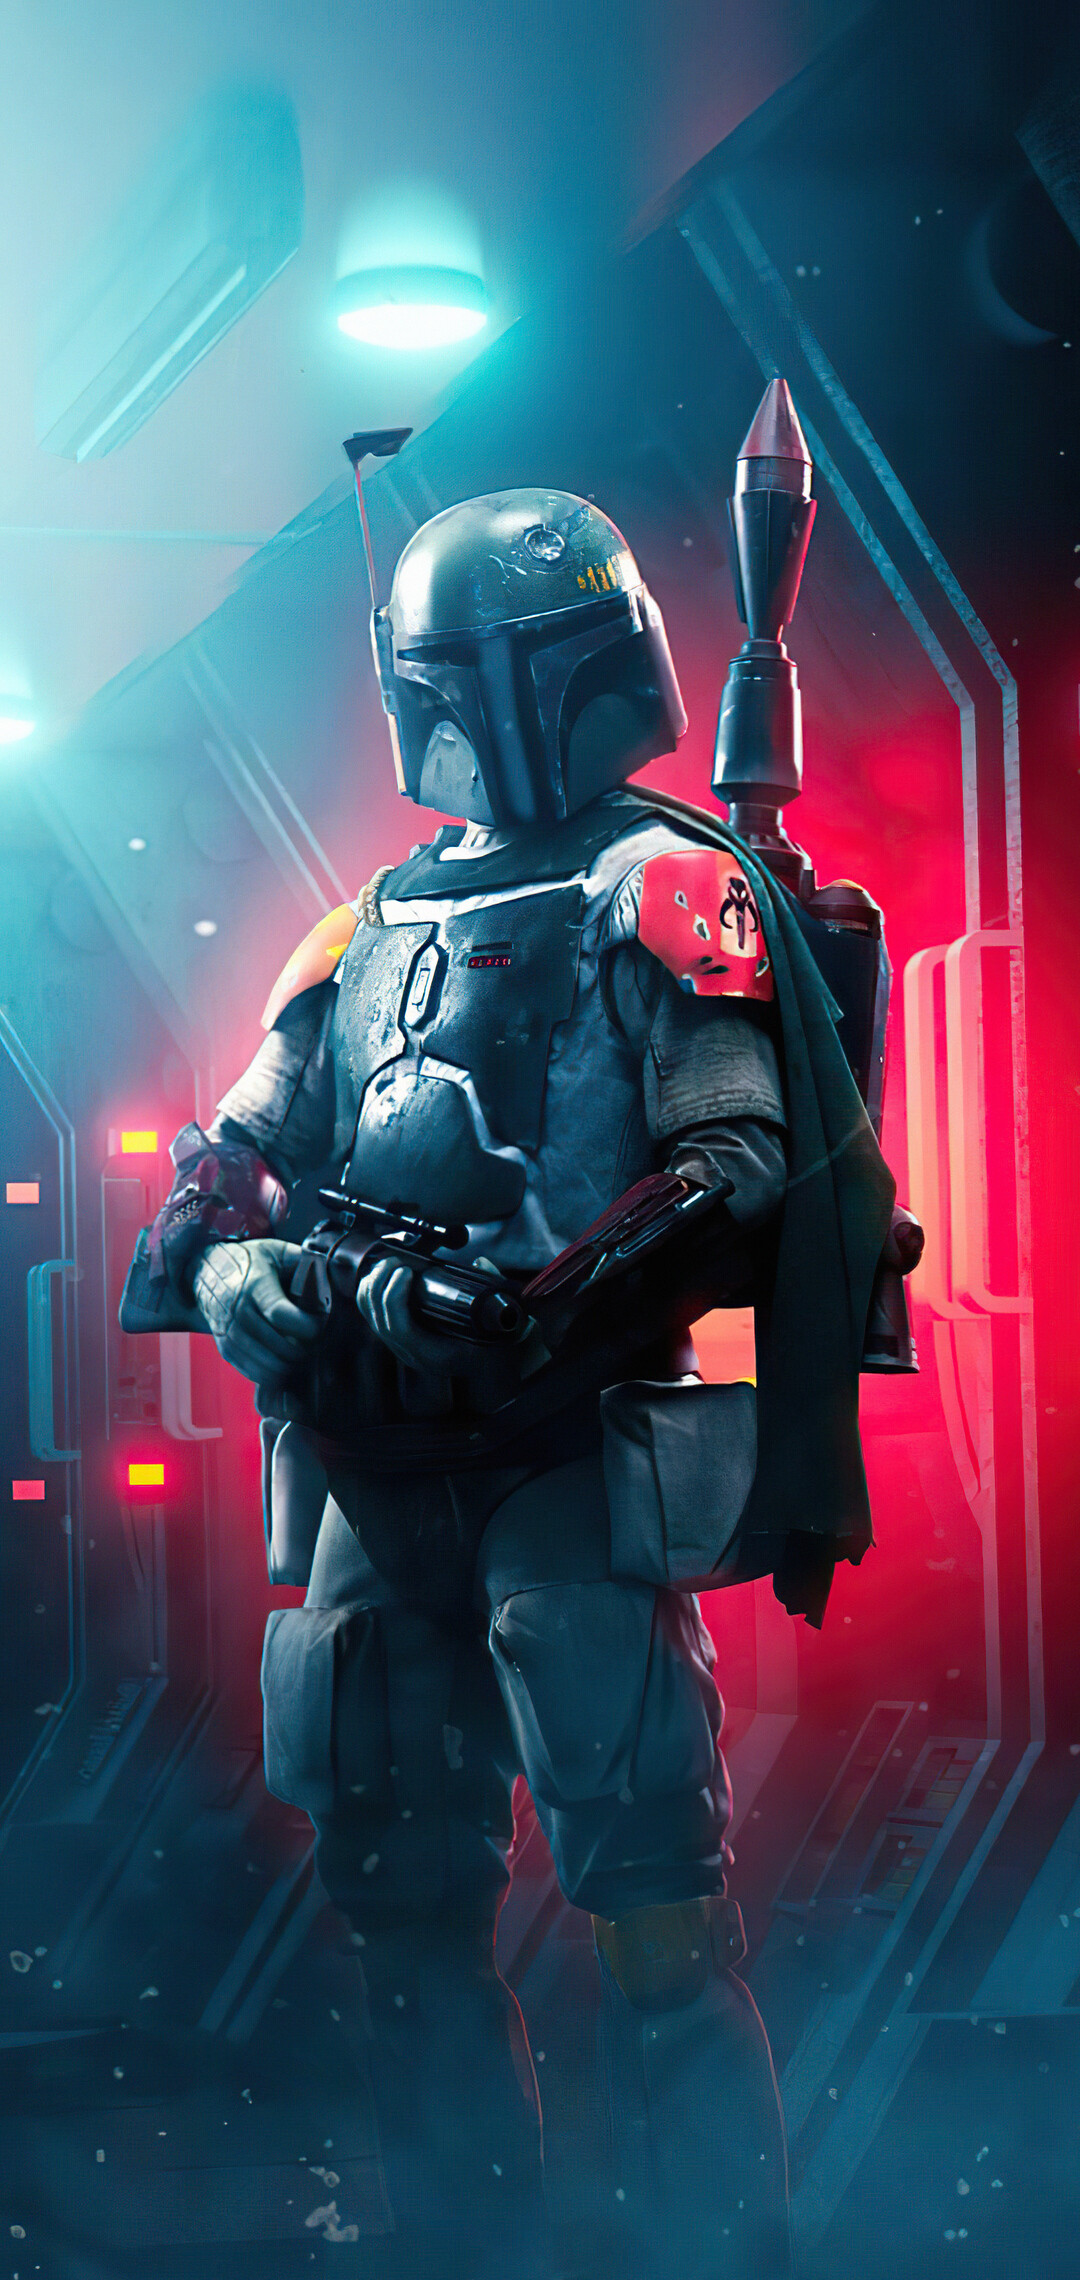 The Book of Boba Fett: Once regarded as one of the most fearsome and capable bounty hunters in the galaxy, Star Wars. 1080x2280 HD Wallpaper.